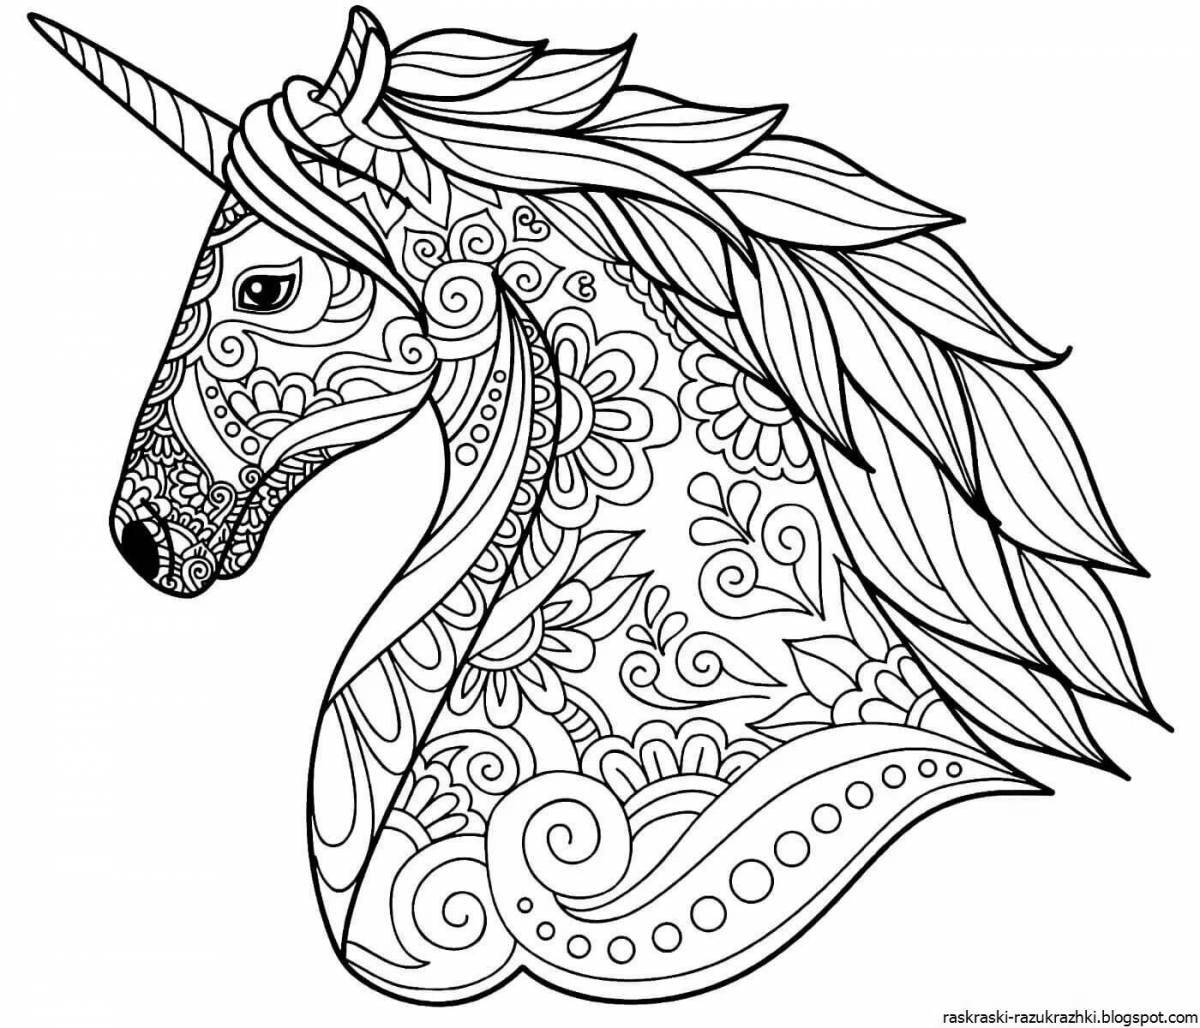 Awesome 11 year old animal coloring book